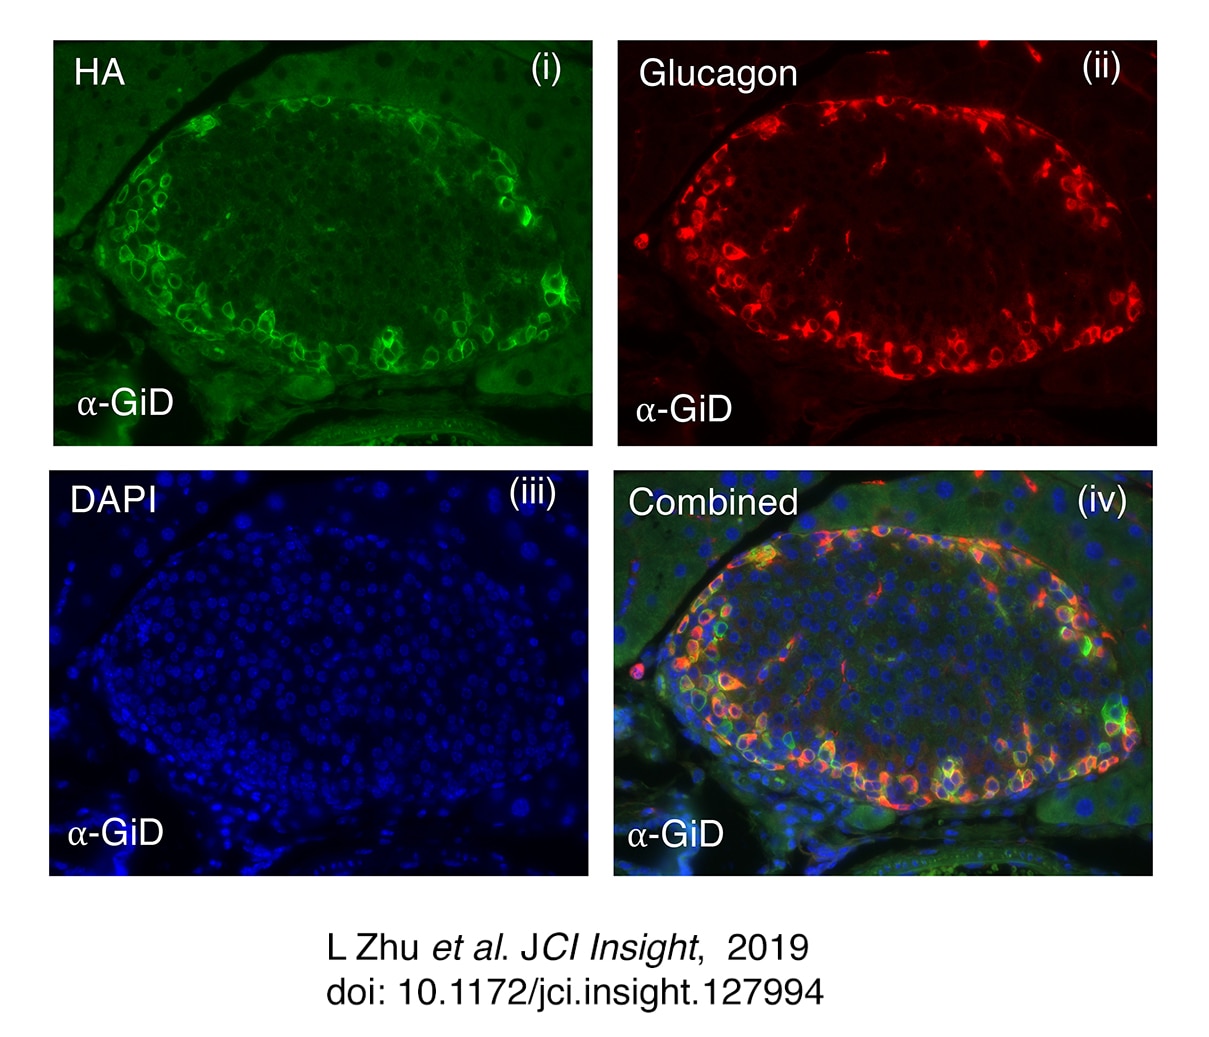 Images of selective expression of Gi-coupled designer receptor (Gi= Gi DREADD) in alpha cells of mouse panceatic islets